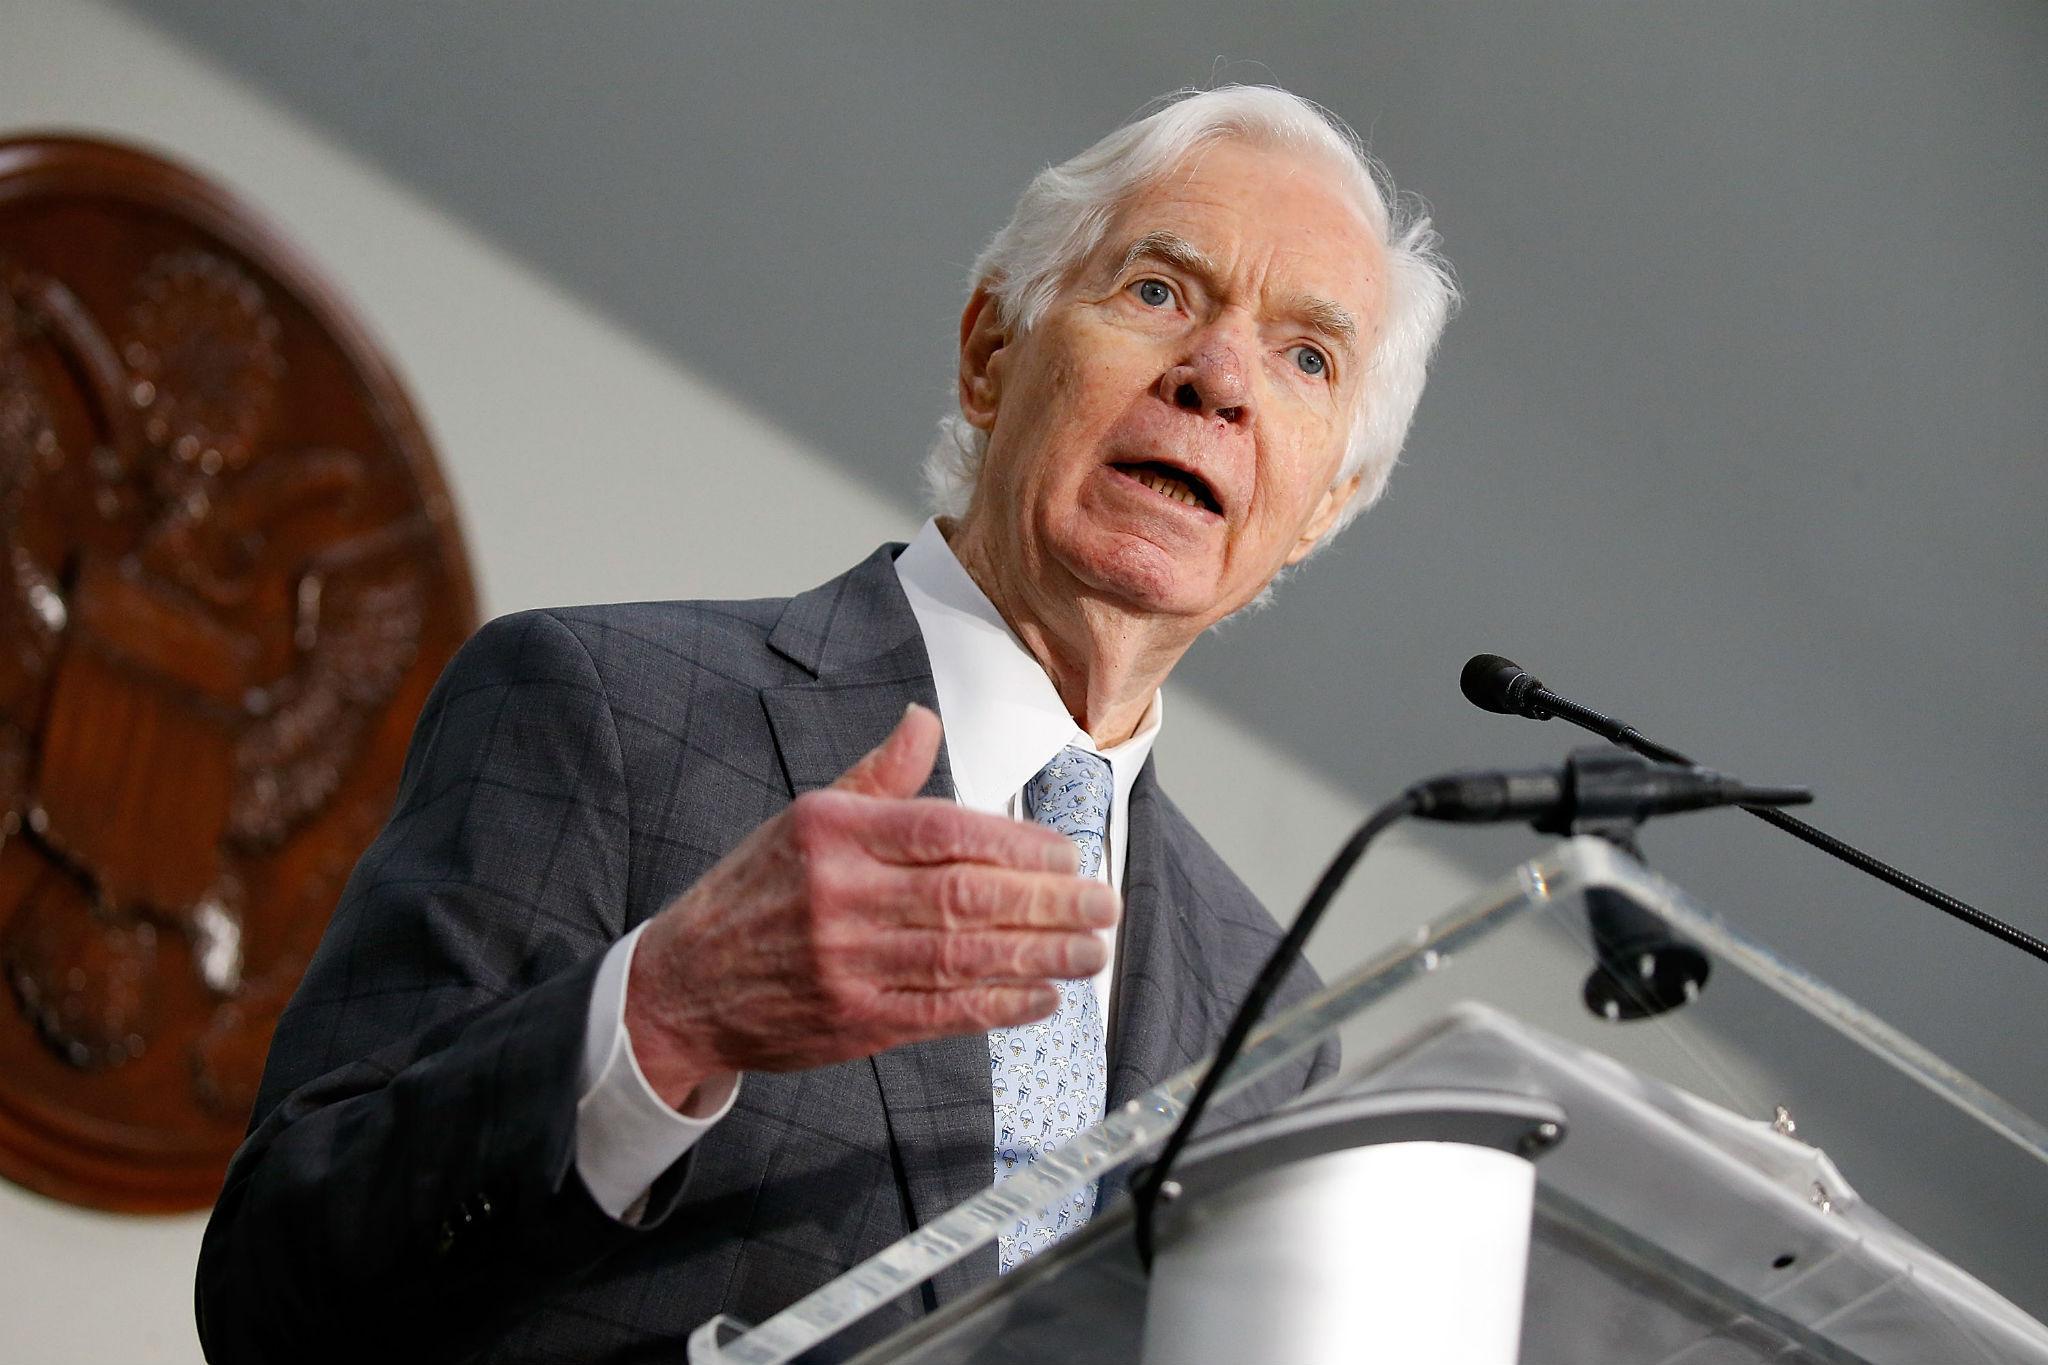 Republican Senator Thad Cochran of Mississippi has announced that he will resign from the US Senate